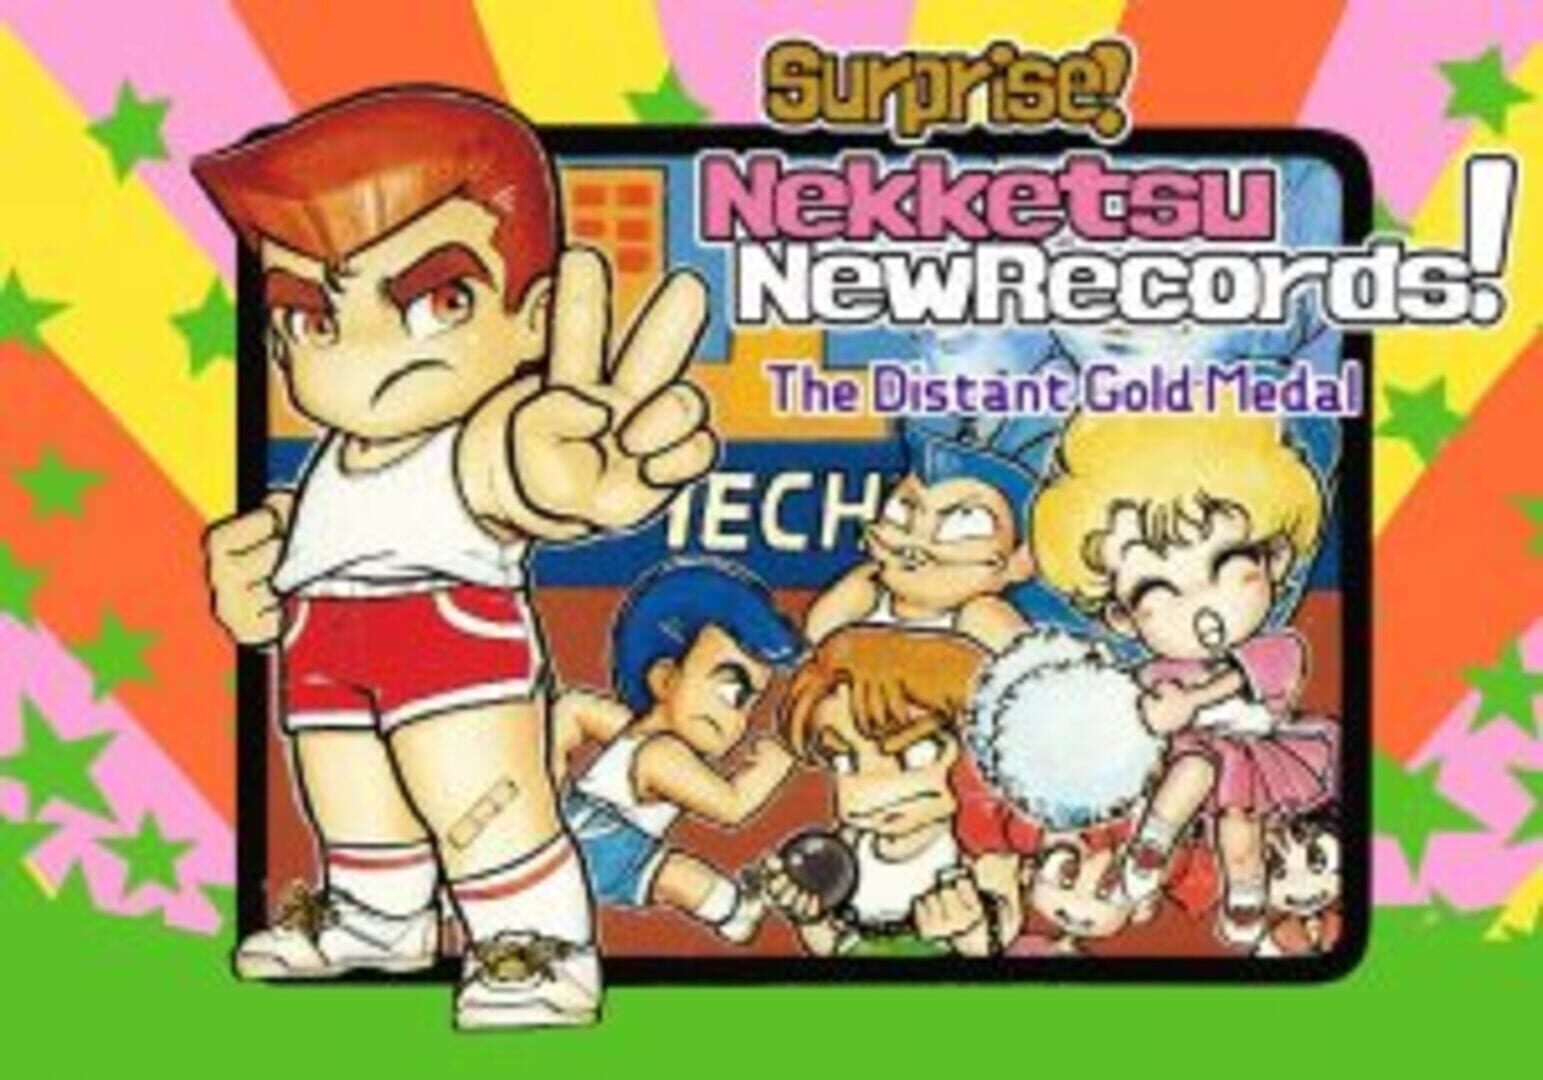 Surprise! Nekketsu New Records! The Distant Gold Medal artwork